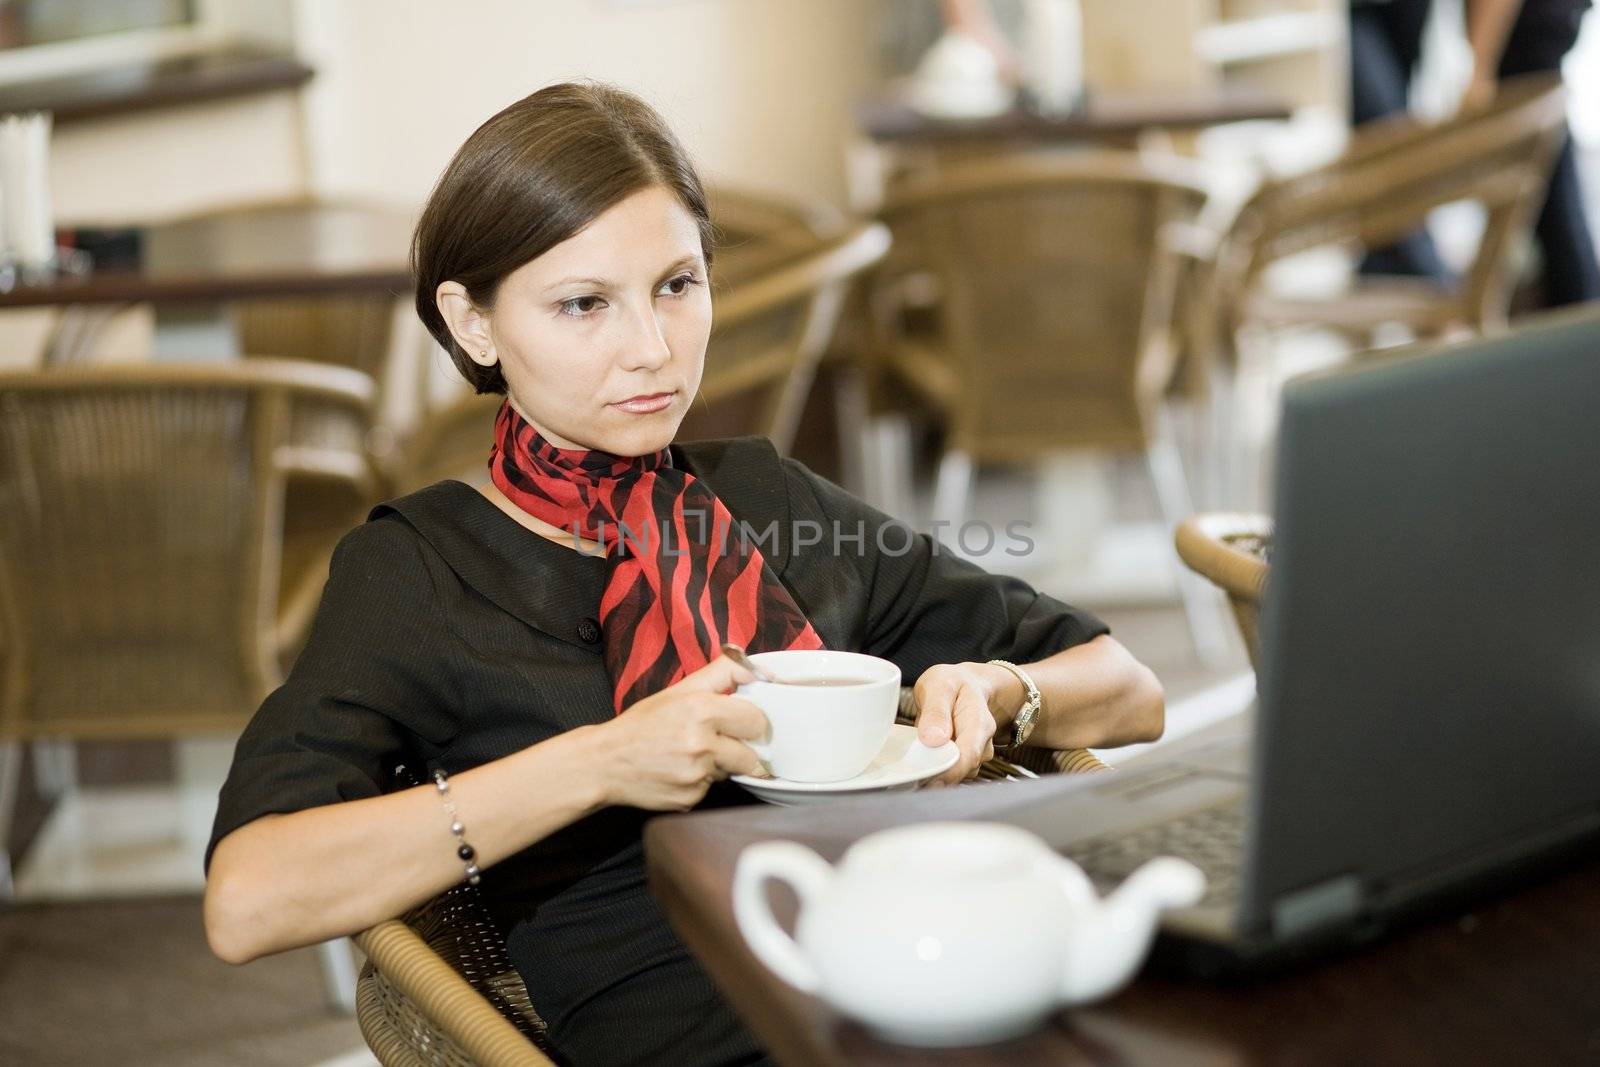 An image of a nice woman in a cafe